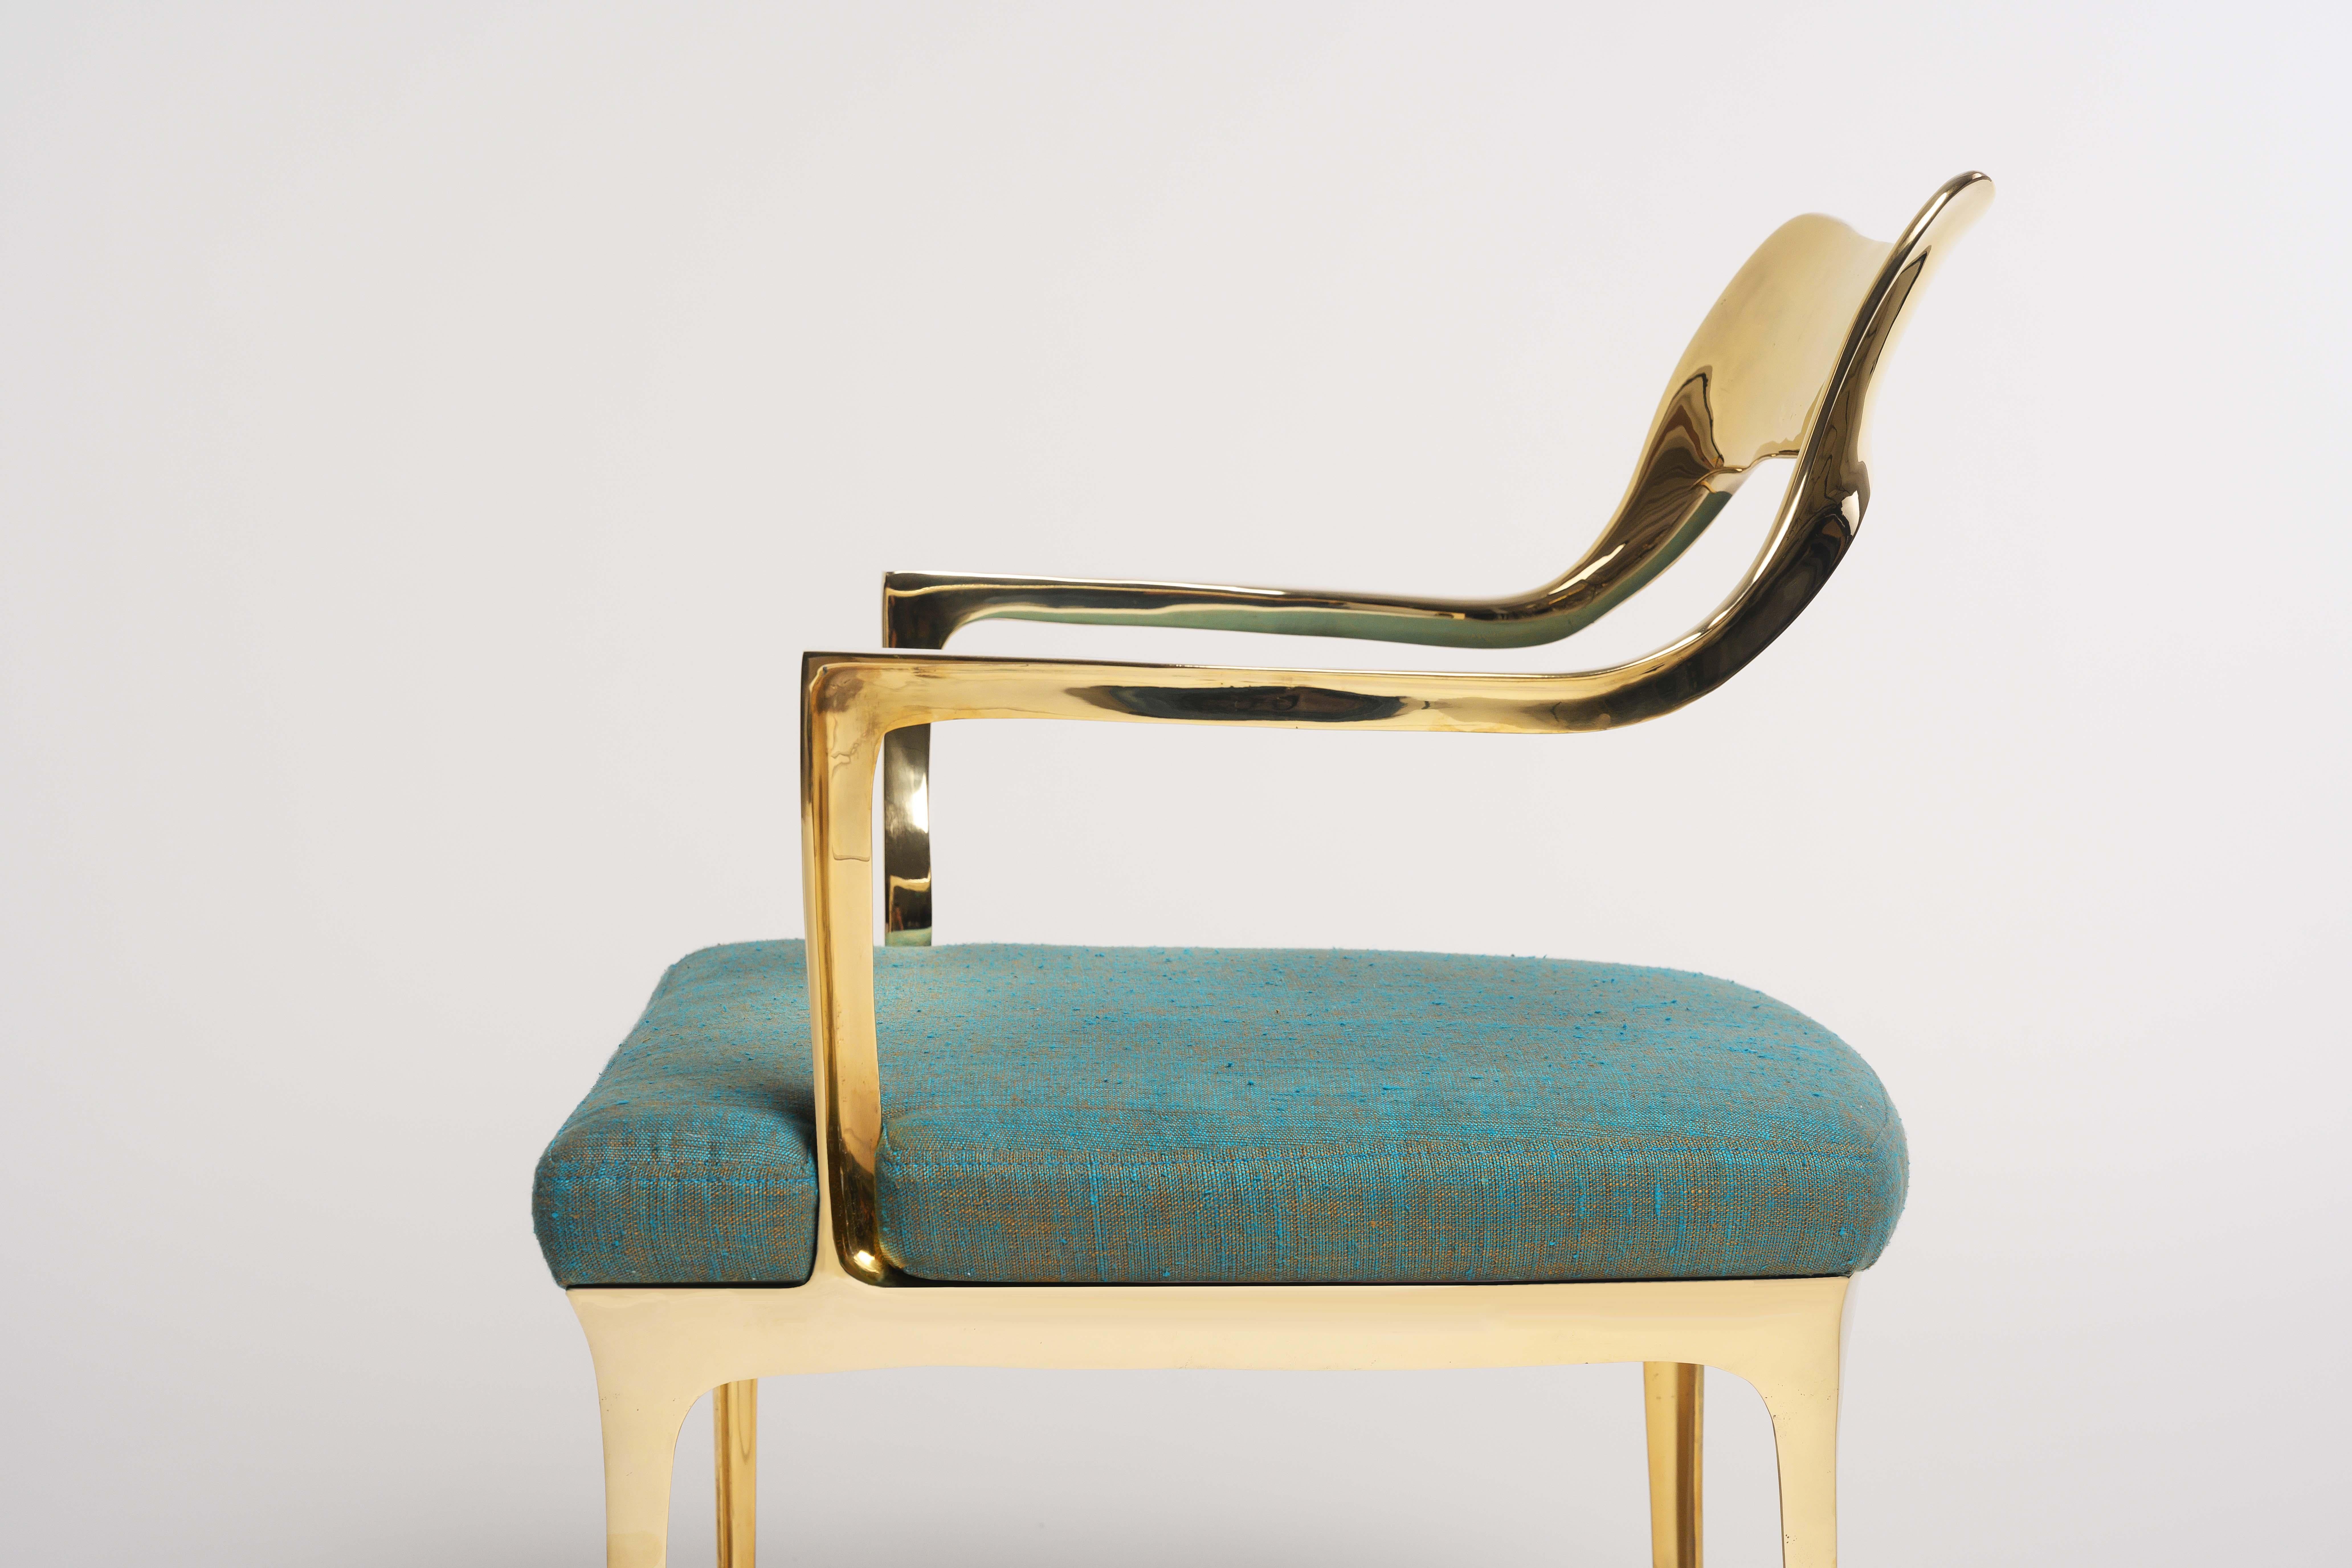 Available for pick up at the NY showroom of Elan Atelier.

Armchair and bench with polished gold bronze frame and marine silk linen upholstery. The frames are cast in bronze using the lost wax cast method.

Armchair dimensions:
W 23 x D 22.4 x H